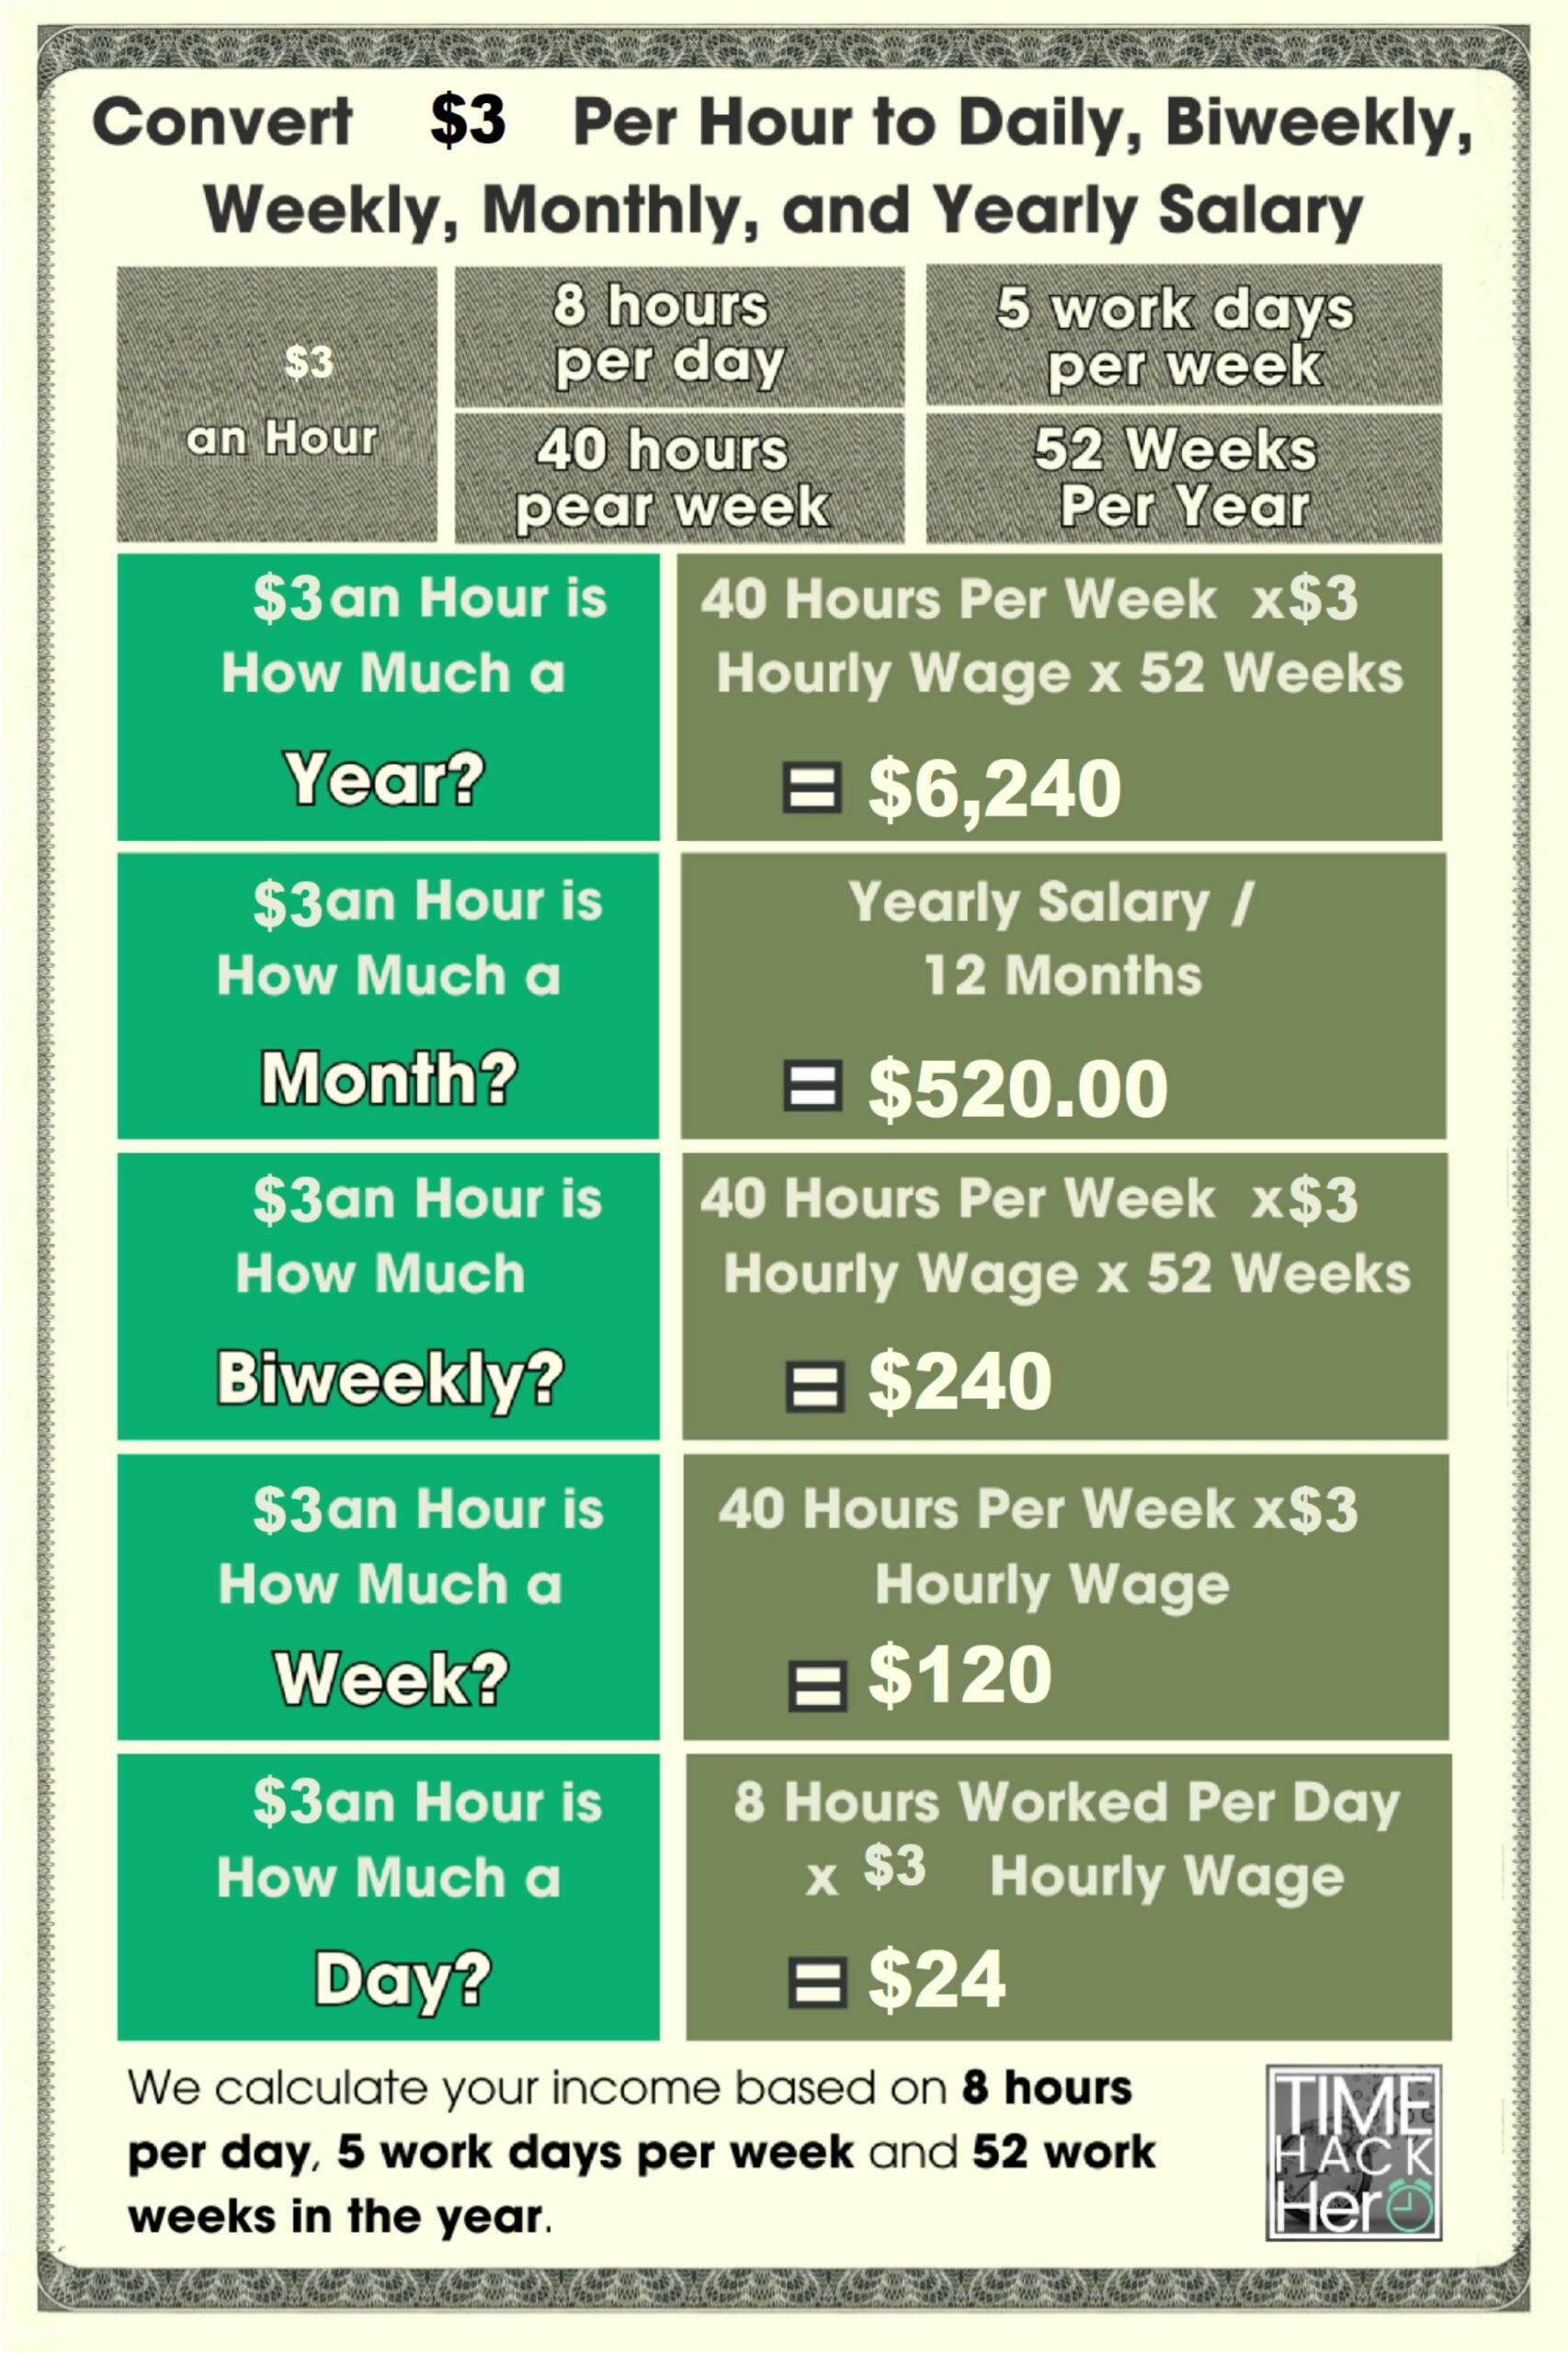 Convert $3 Per Hour to Weekly, Monthly, and Yearly Salary